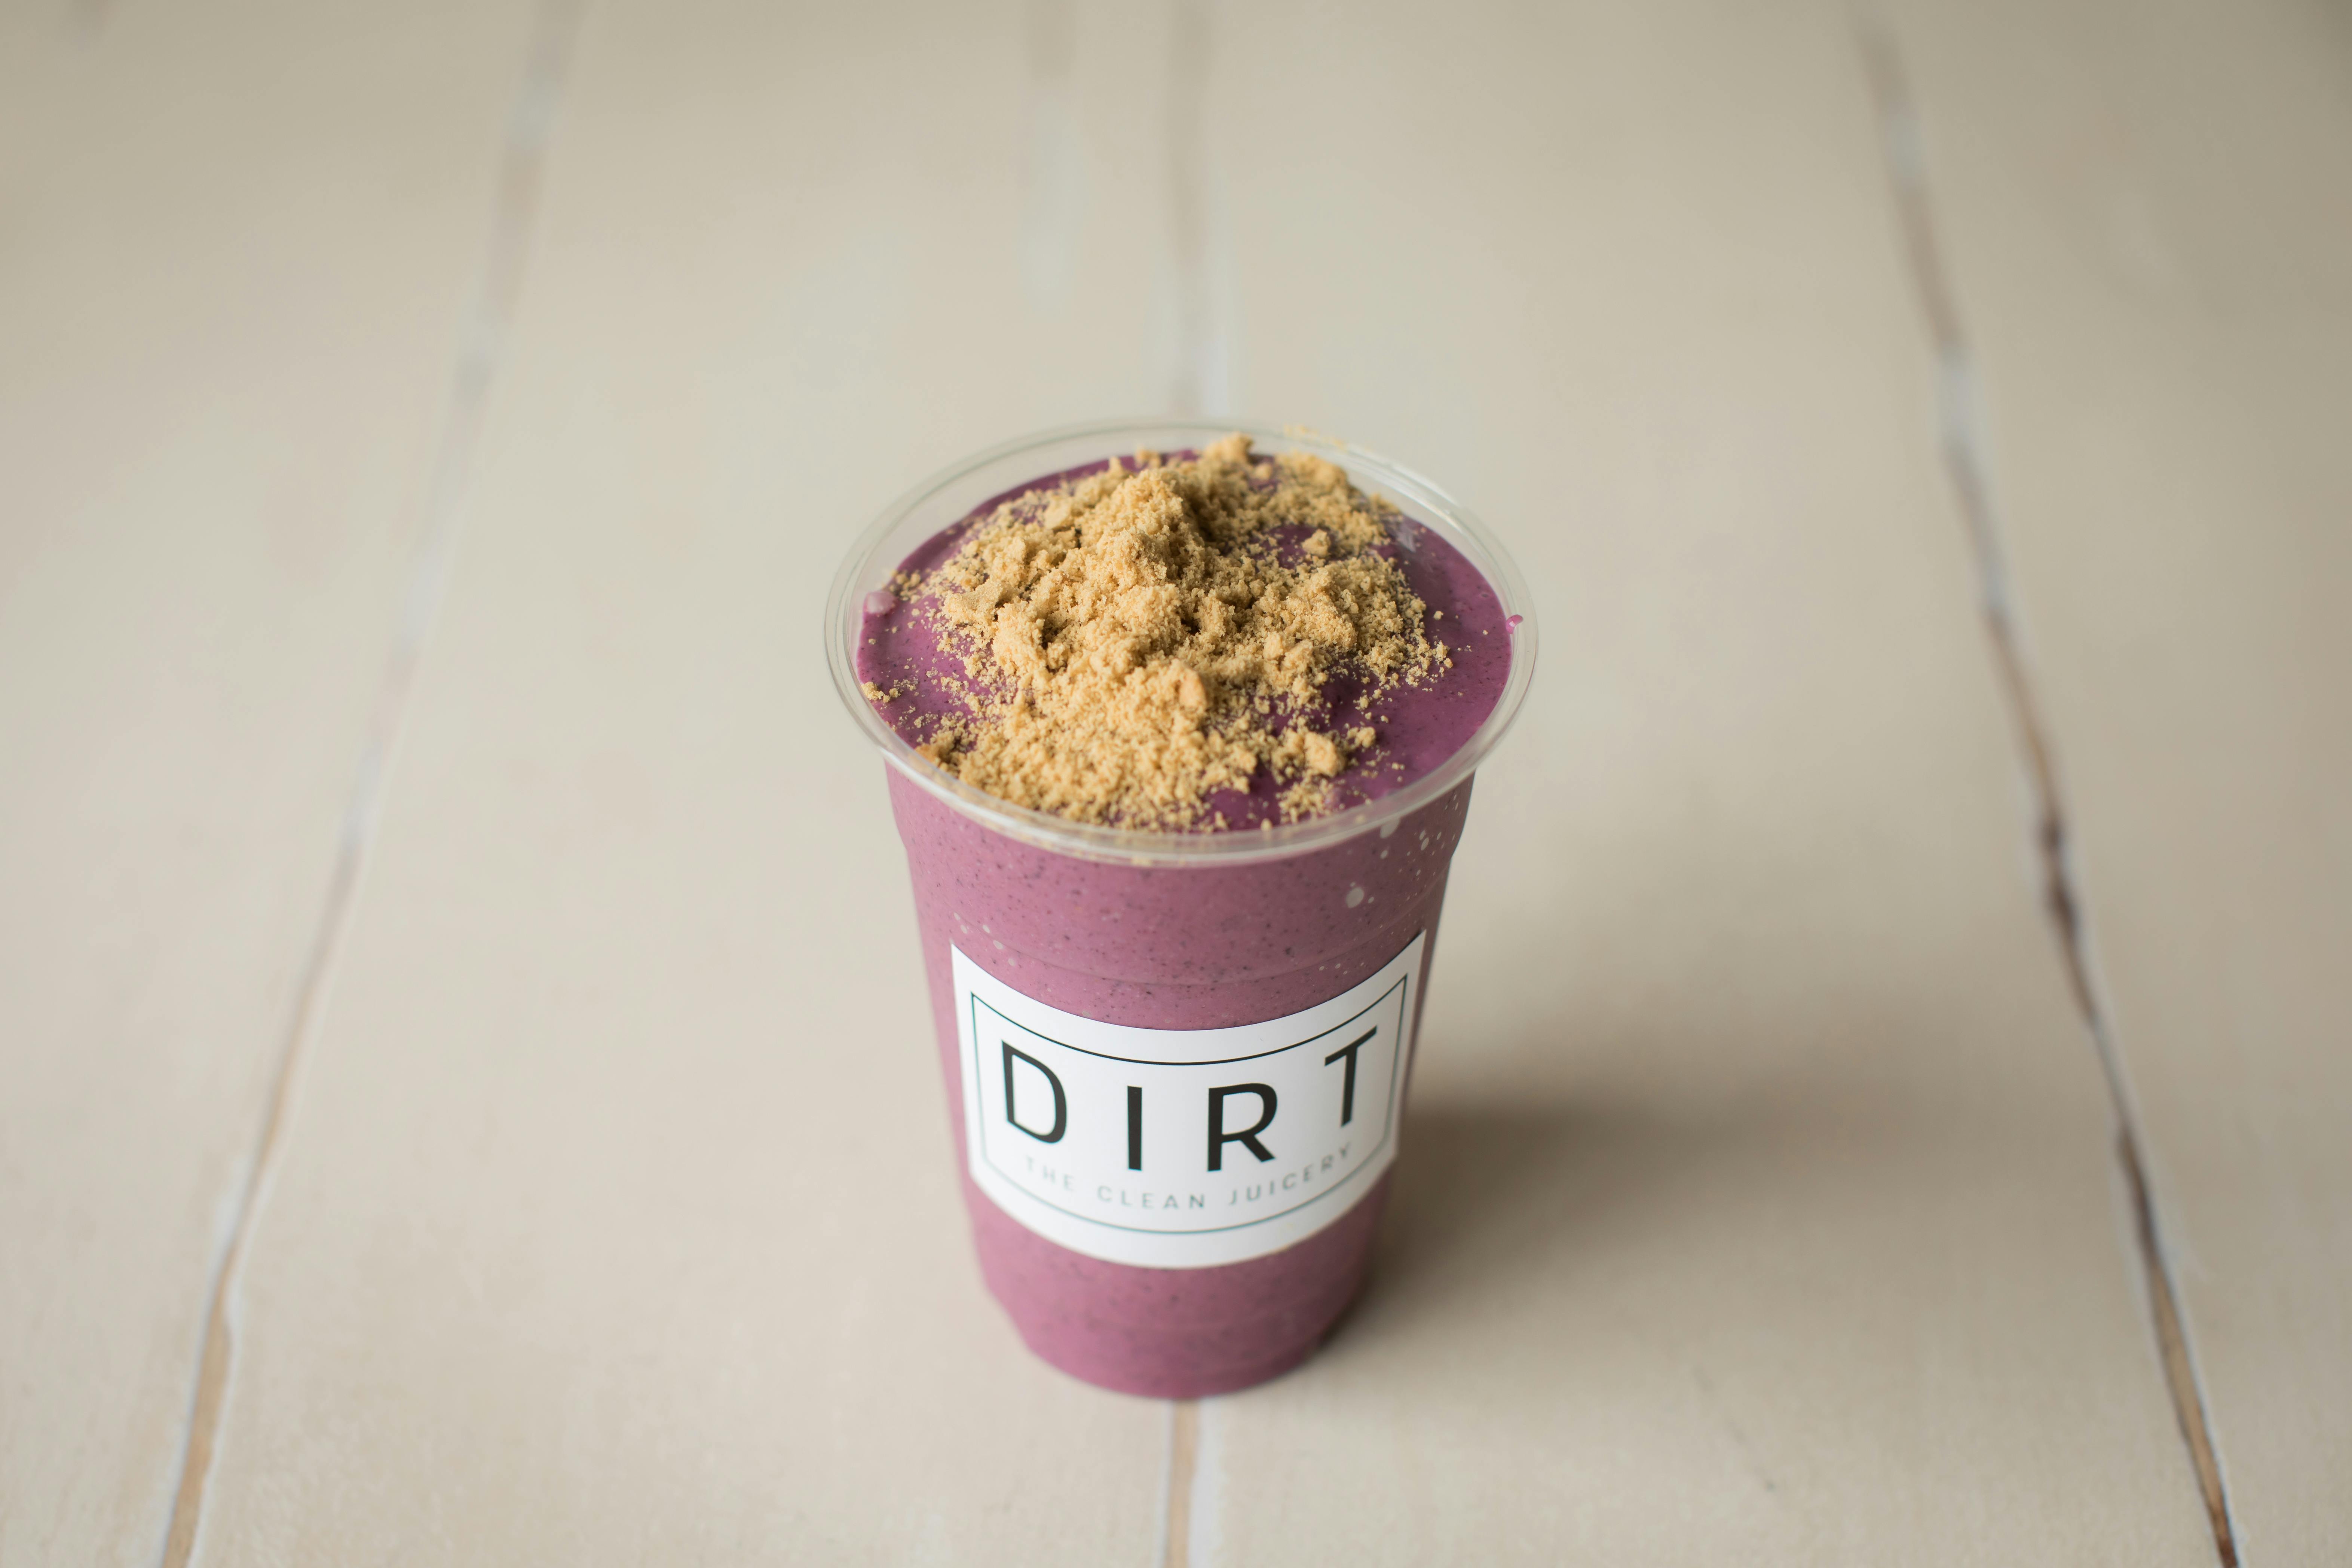 Blueberry Cheesecake from Dirt Juicery - Lineville Rd in Green Bay, WI